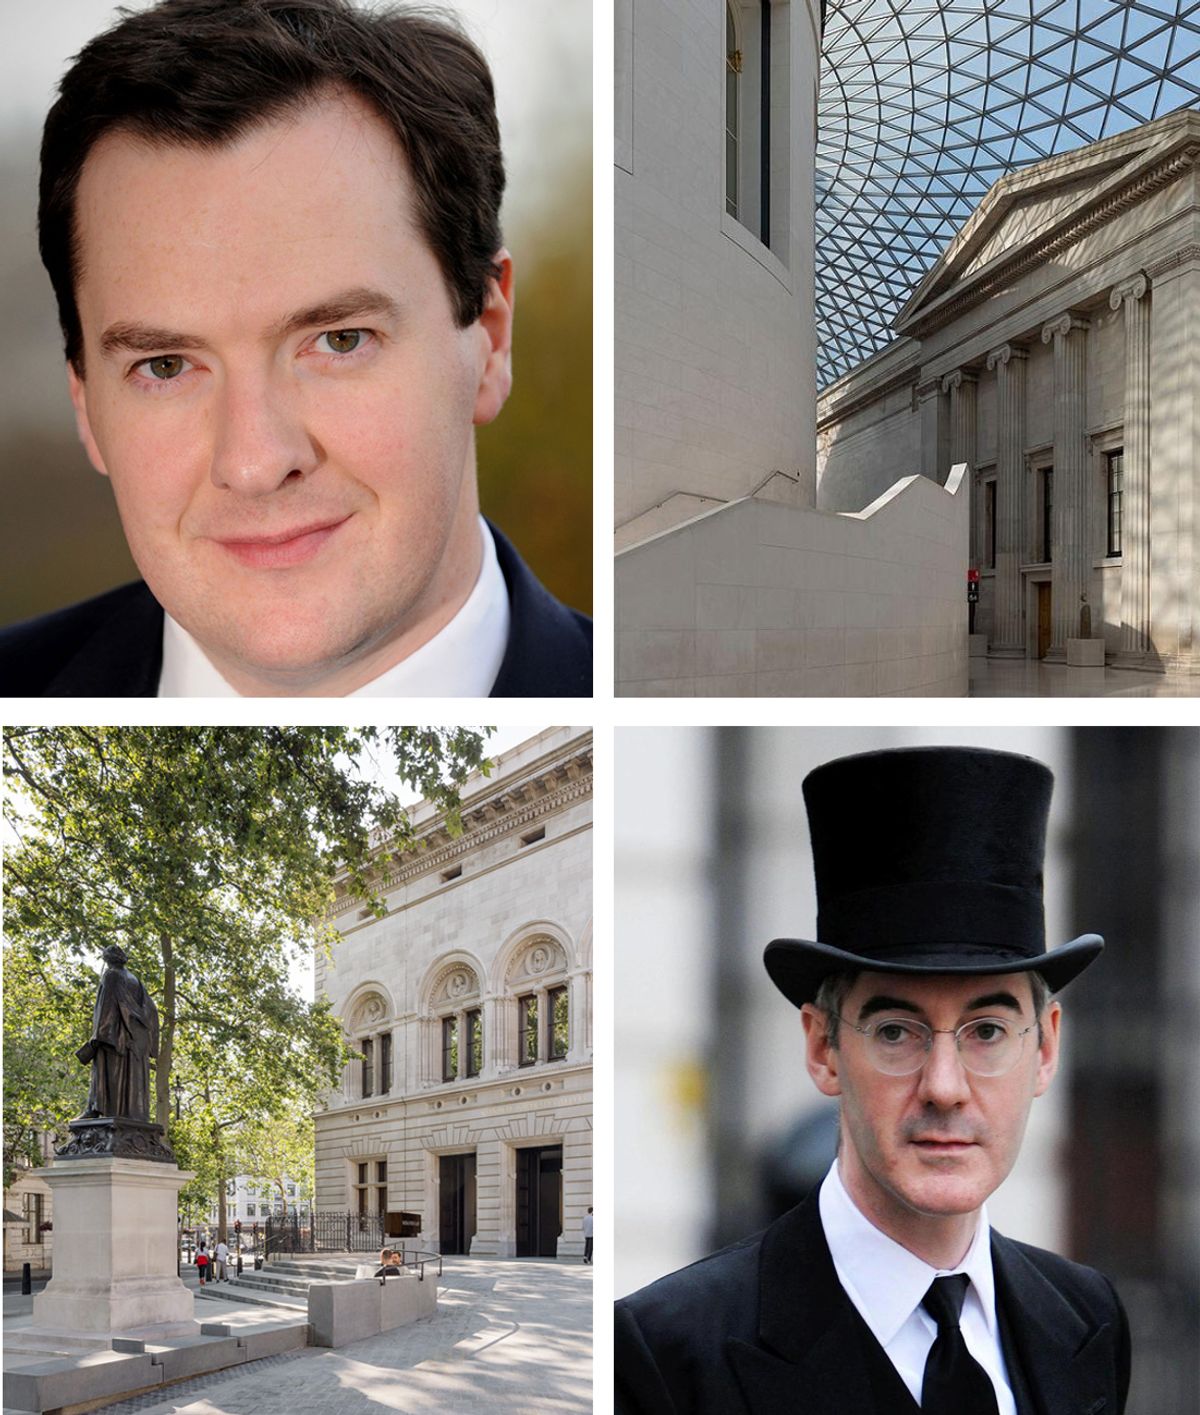 George Osborne (top left) and Jacob Rees-Mogg (bottom right) are two prominent examples of politicians who sit on the boards of major UK museums, respectively the British Museum and the National Portrait Gallery, both in London